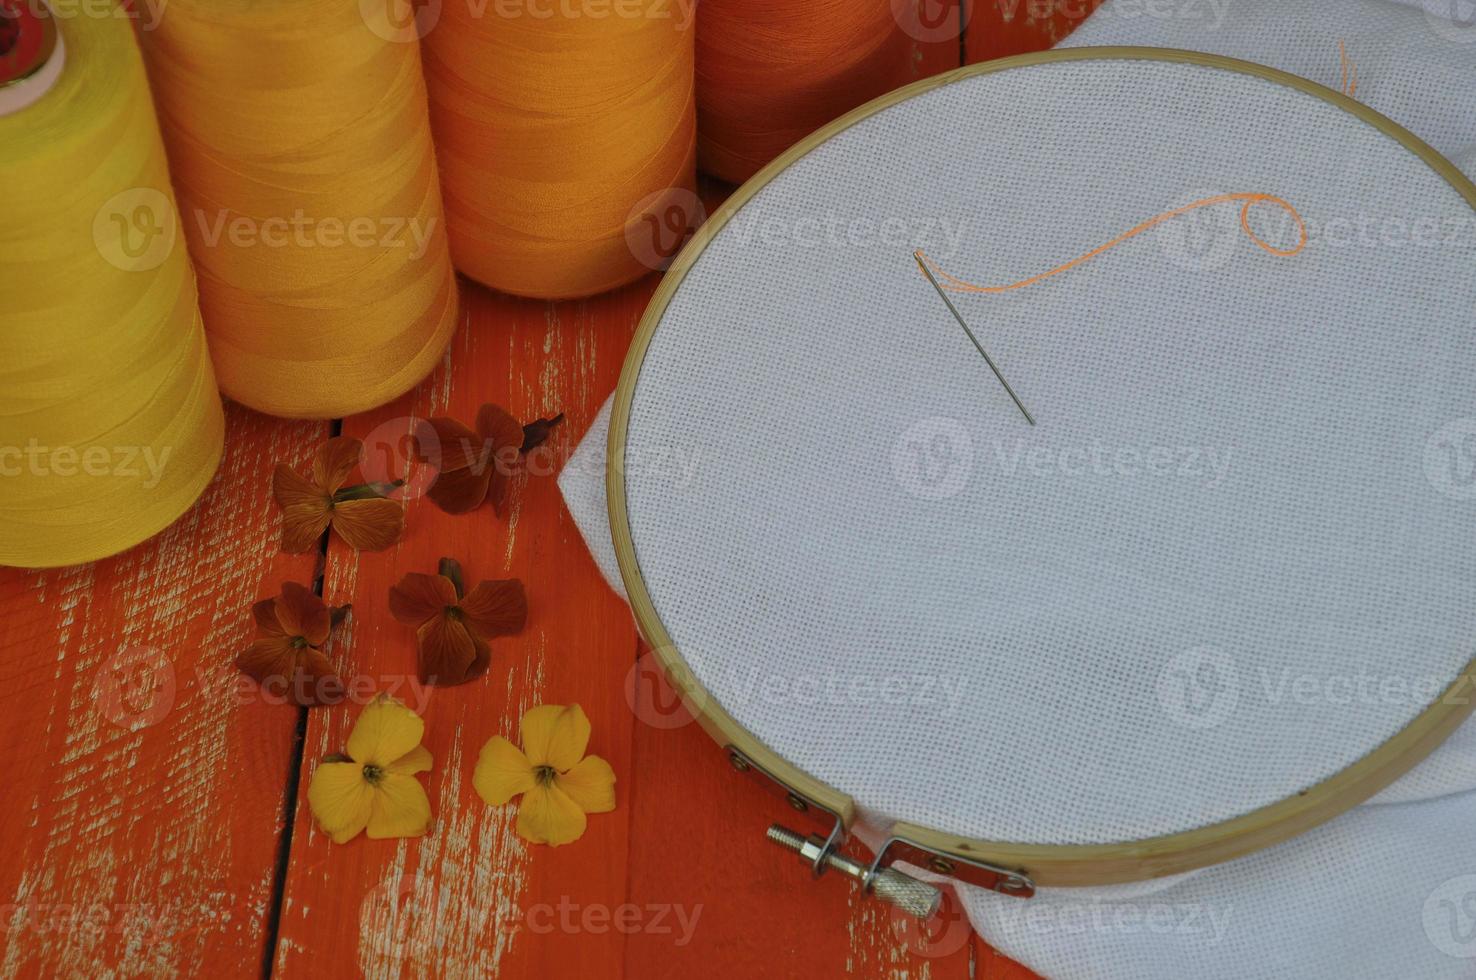 The prepared fabric in the hoop for embroidery photo